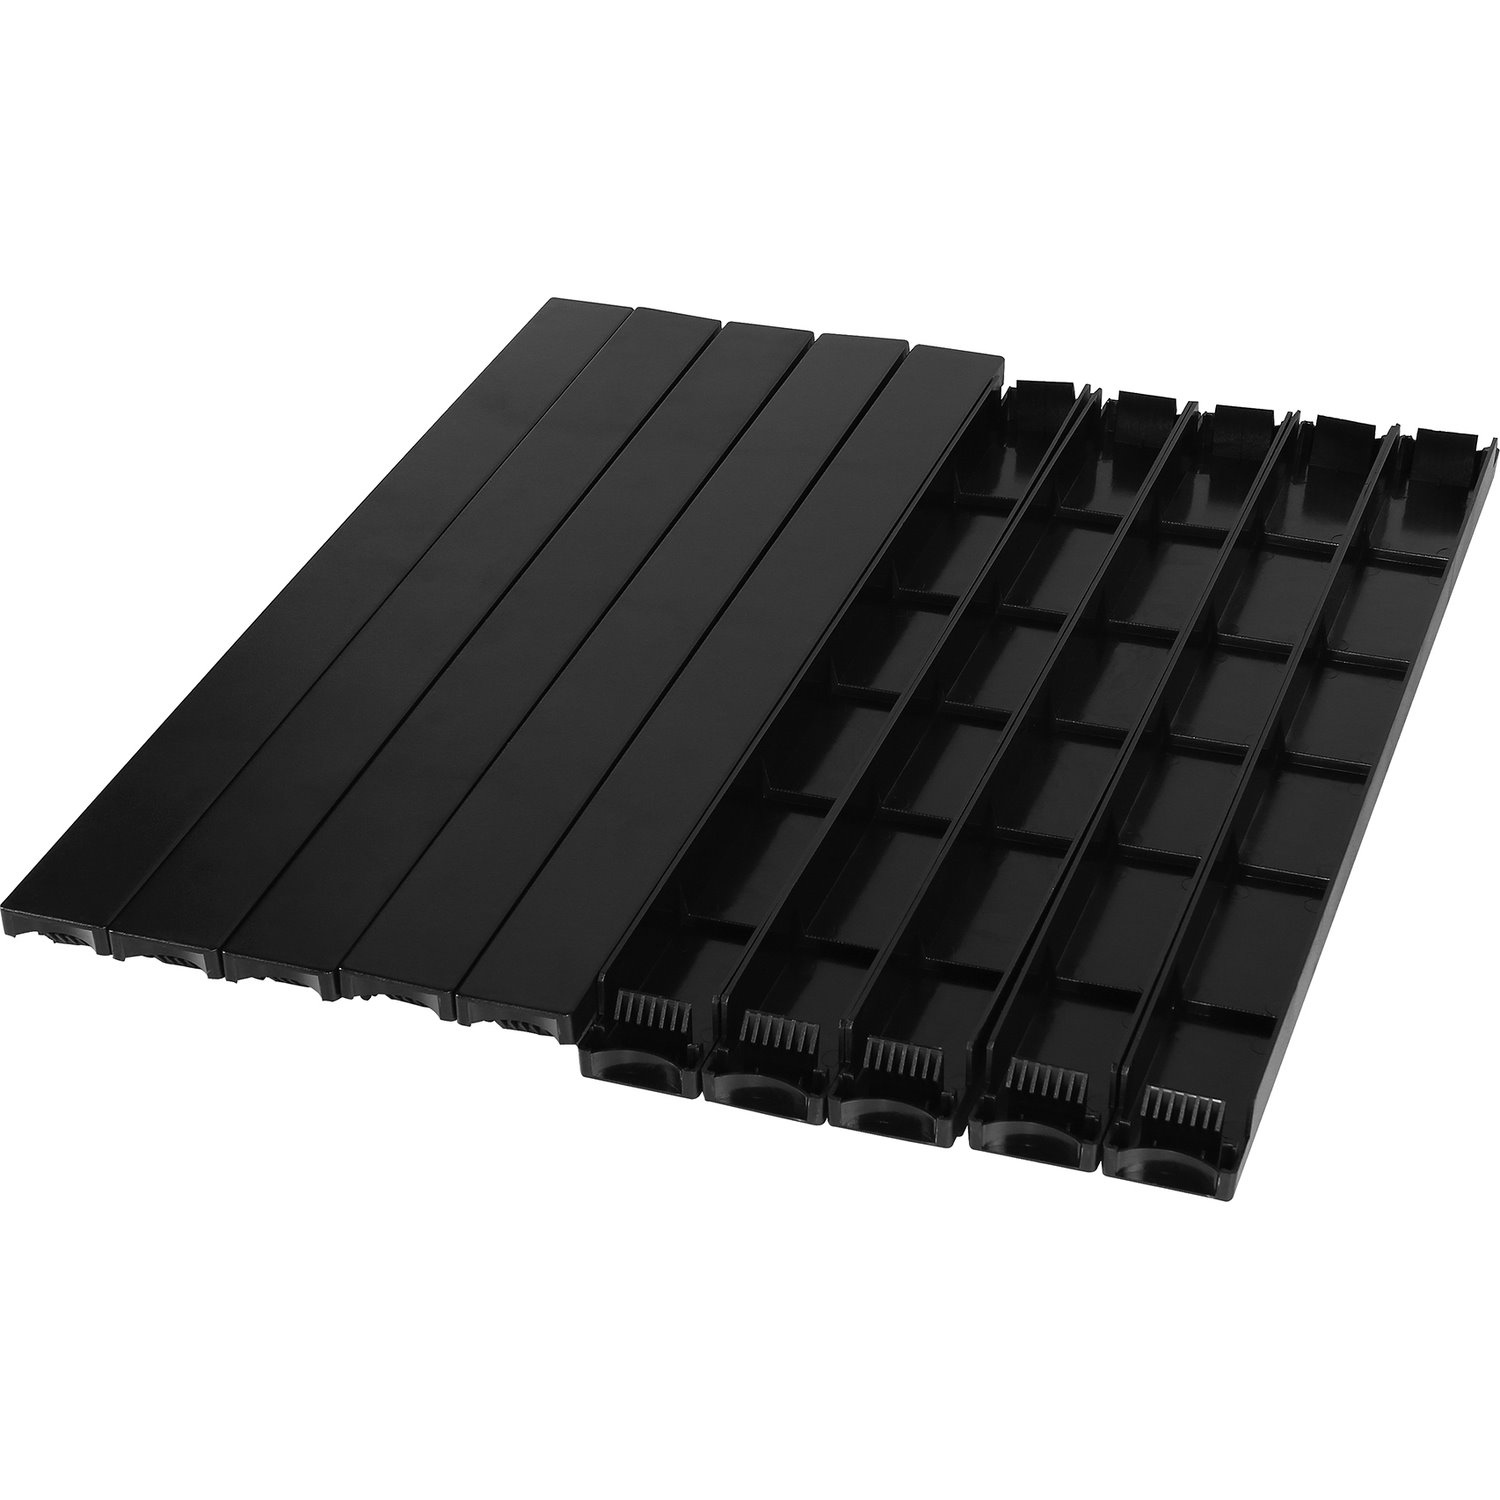 CyberPower CRA20001 Blanking panels Rack Accessories